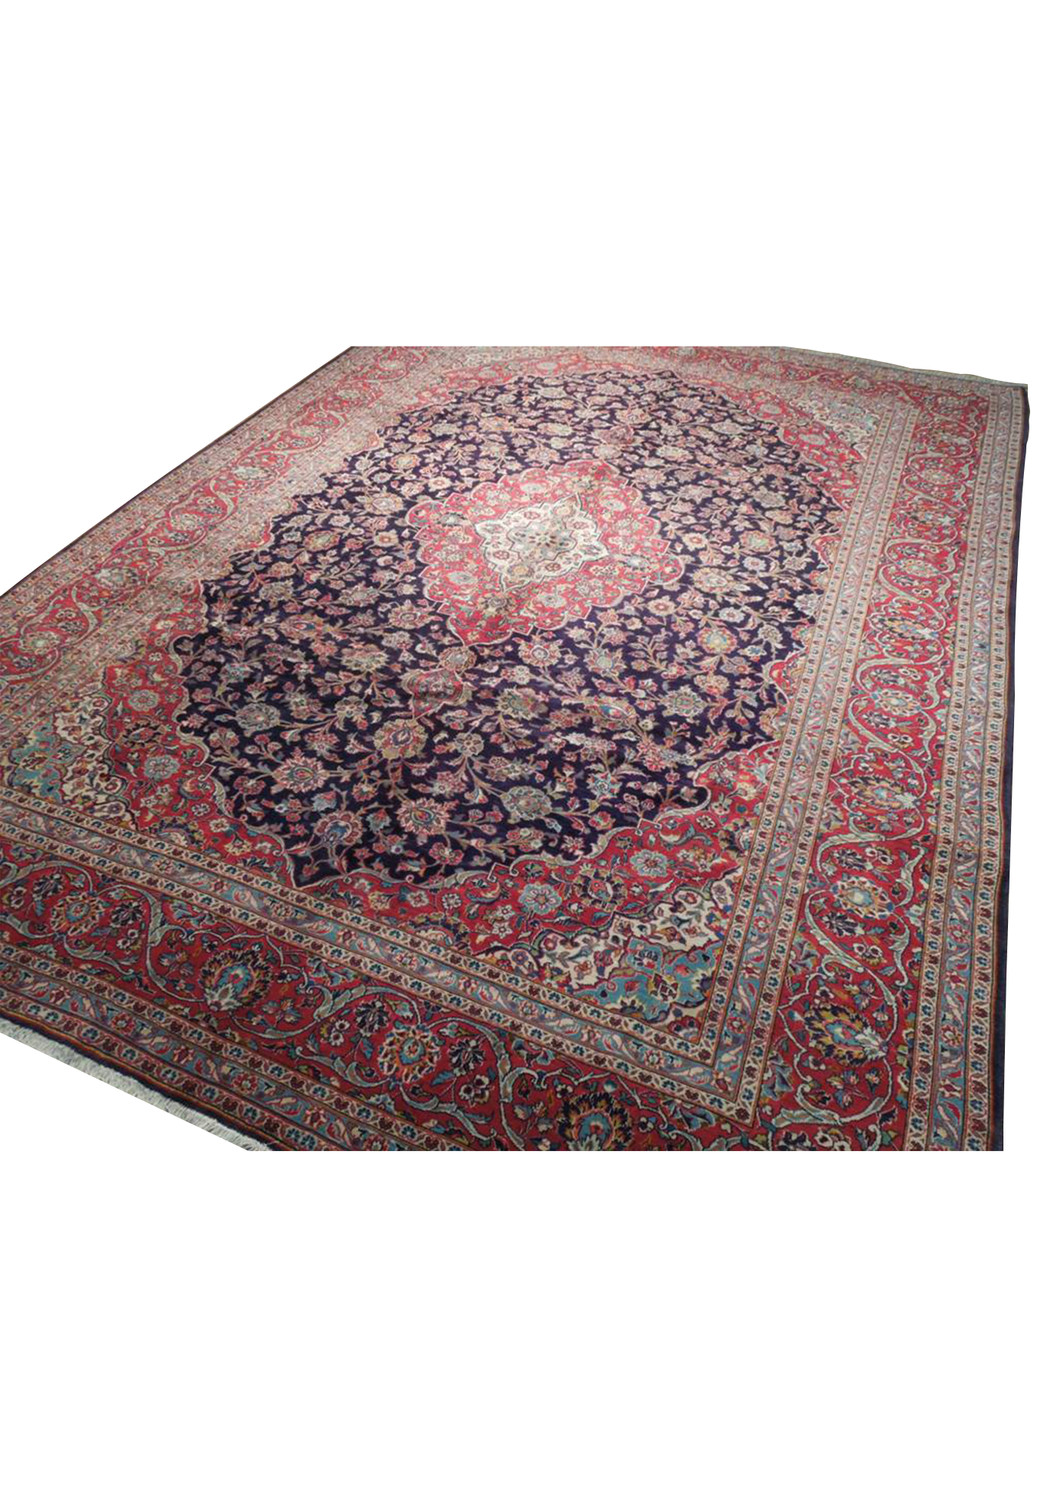 intricate Persian Kashan carpet featuring a dense floral design and traditional geometric borders in vibrant reds and deep blues, measuring 10 by 13.5 feet